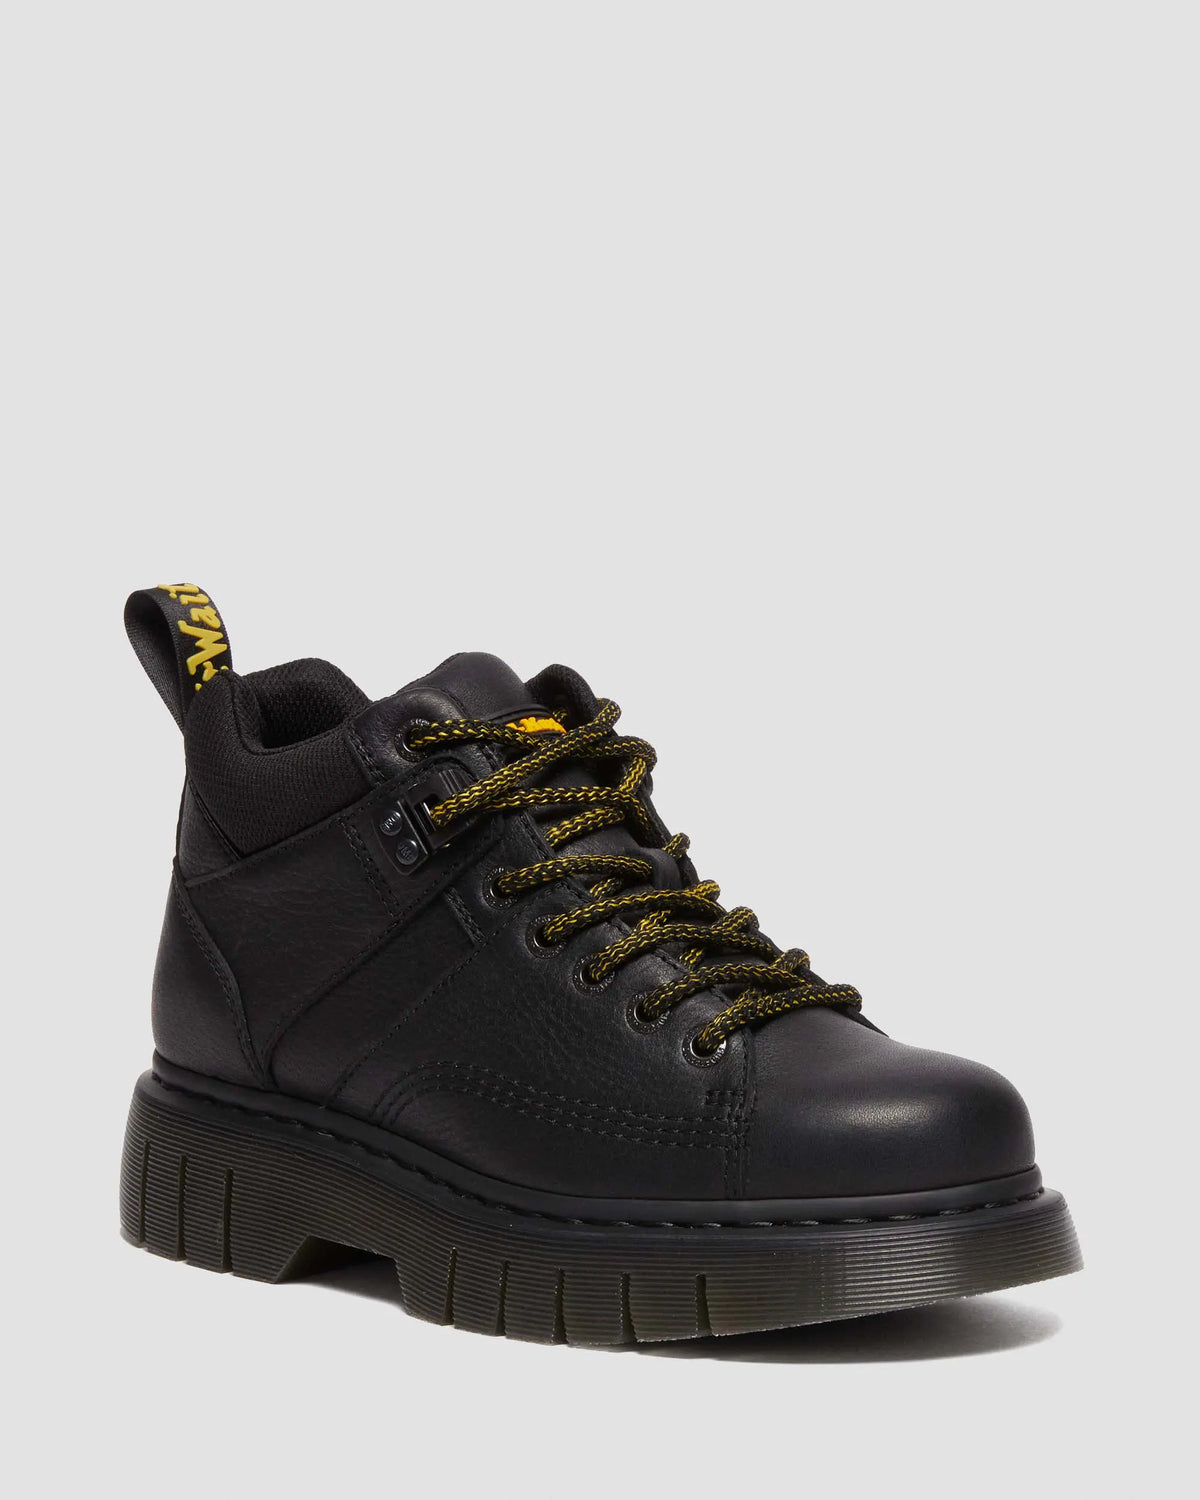 Dr. Martens, Woodard Black Grizzly